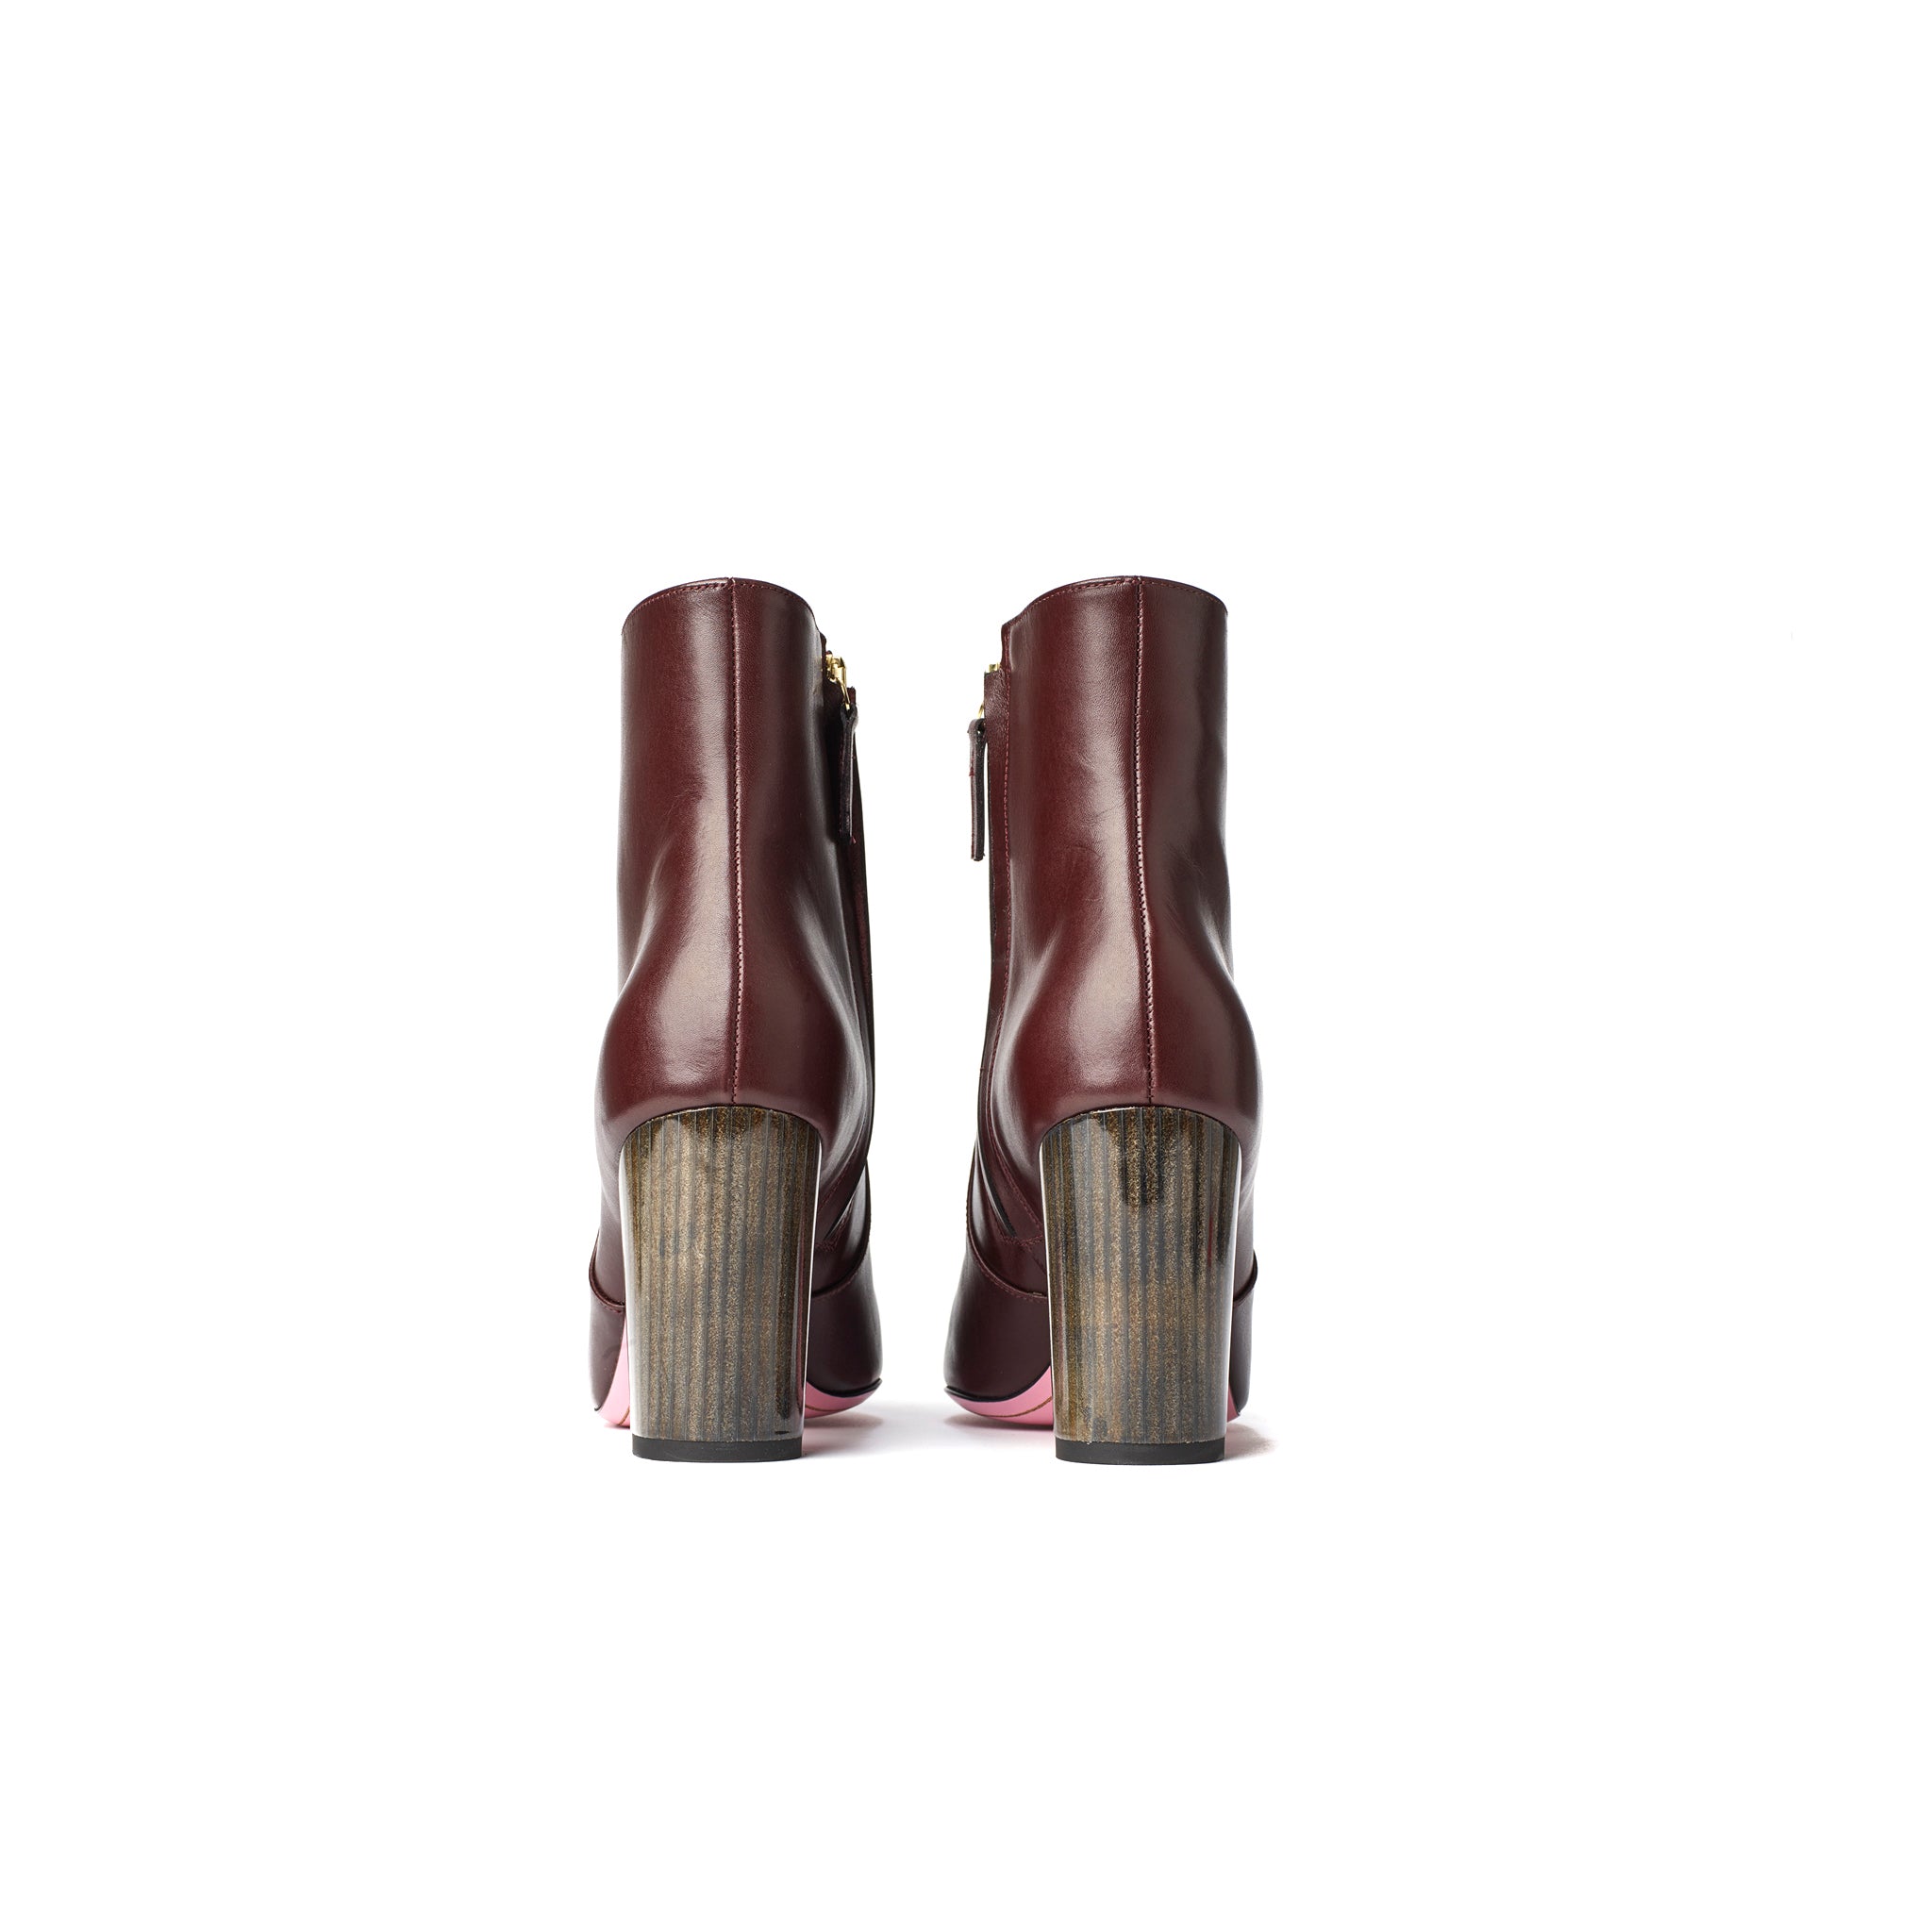 Phare Pointed block heel boot in bordeaux leather made in Italy back view 